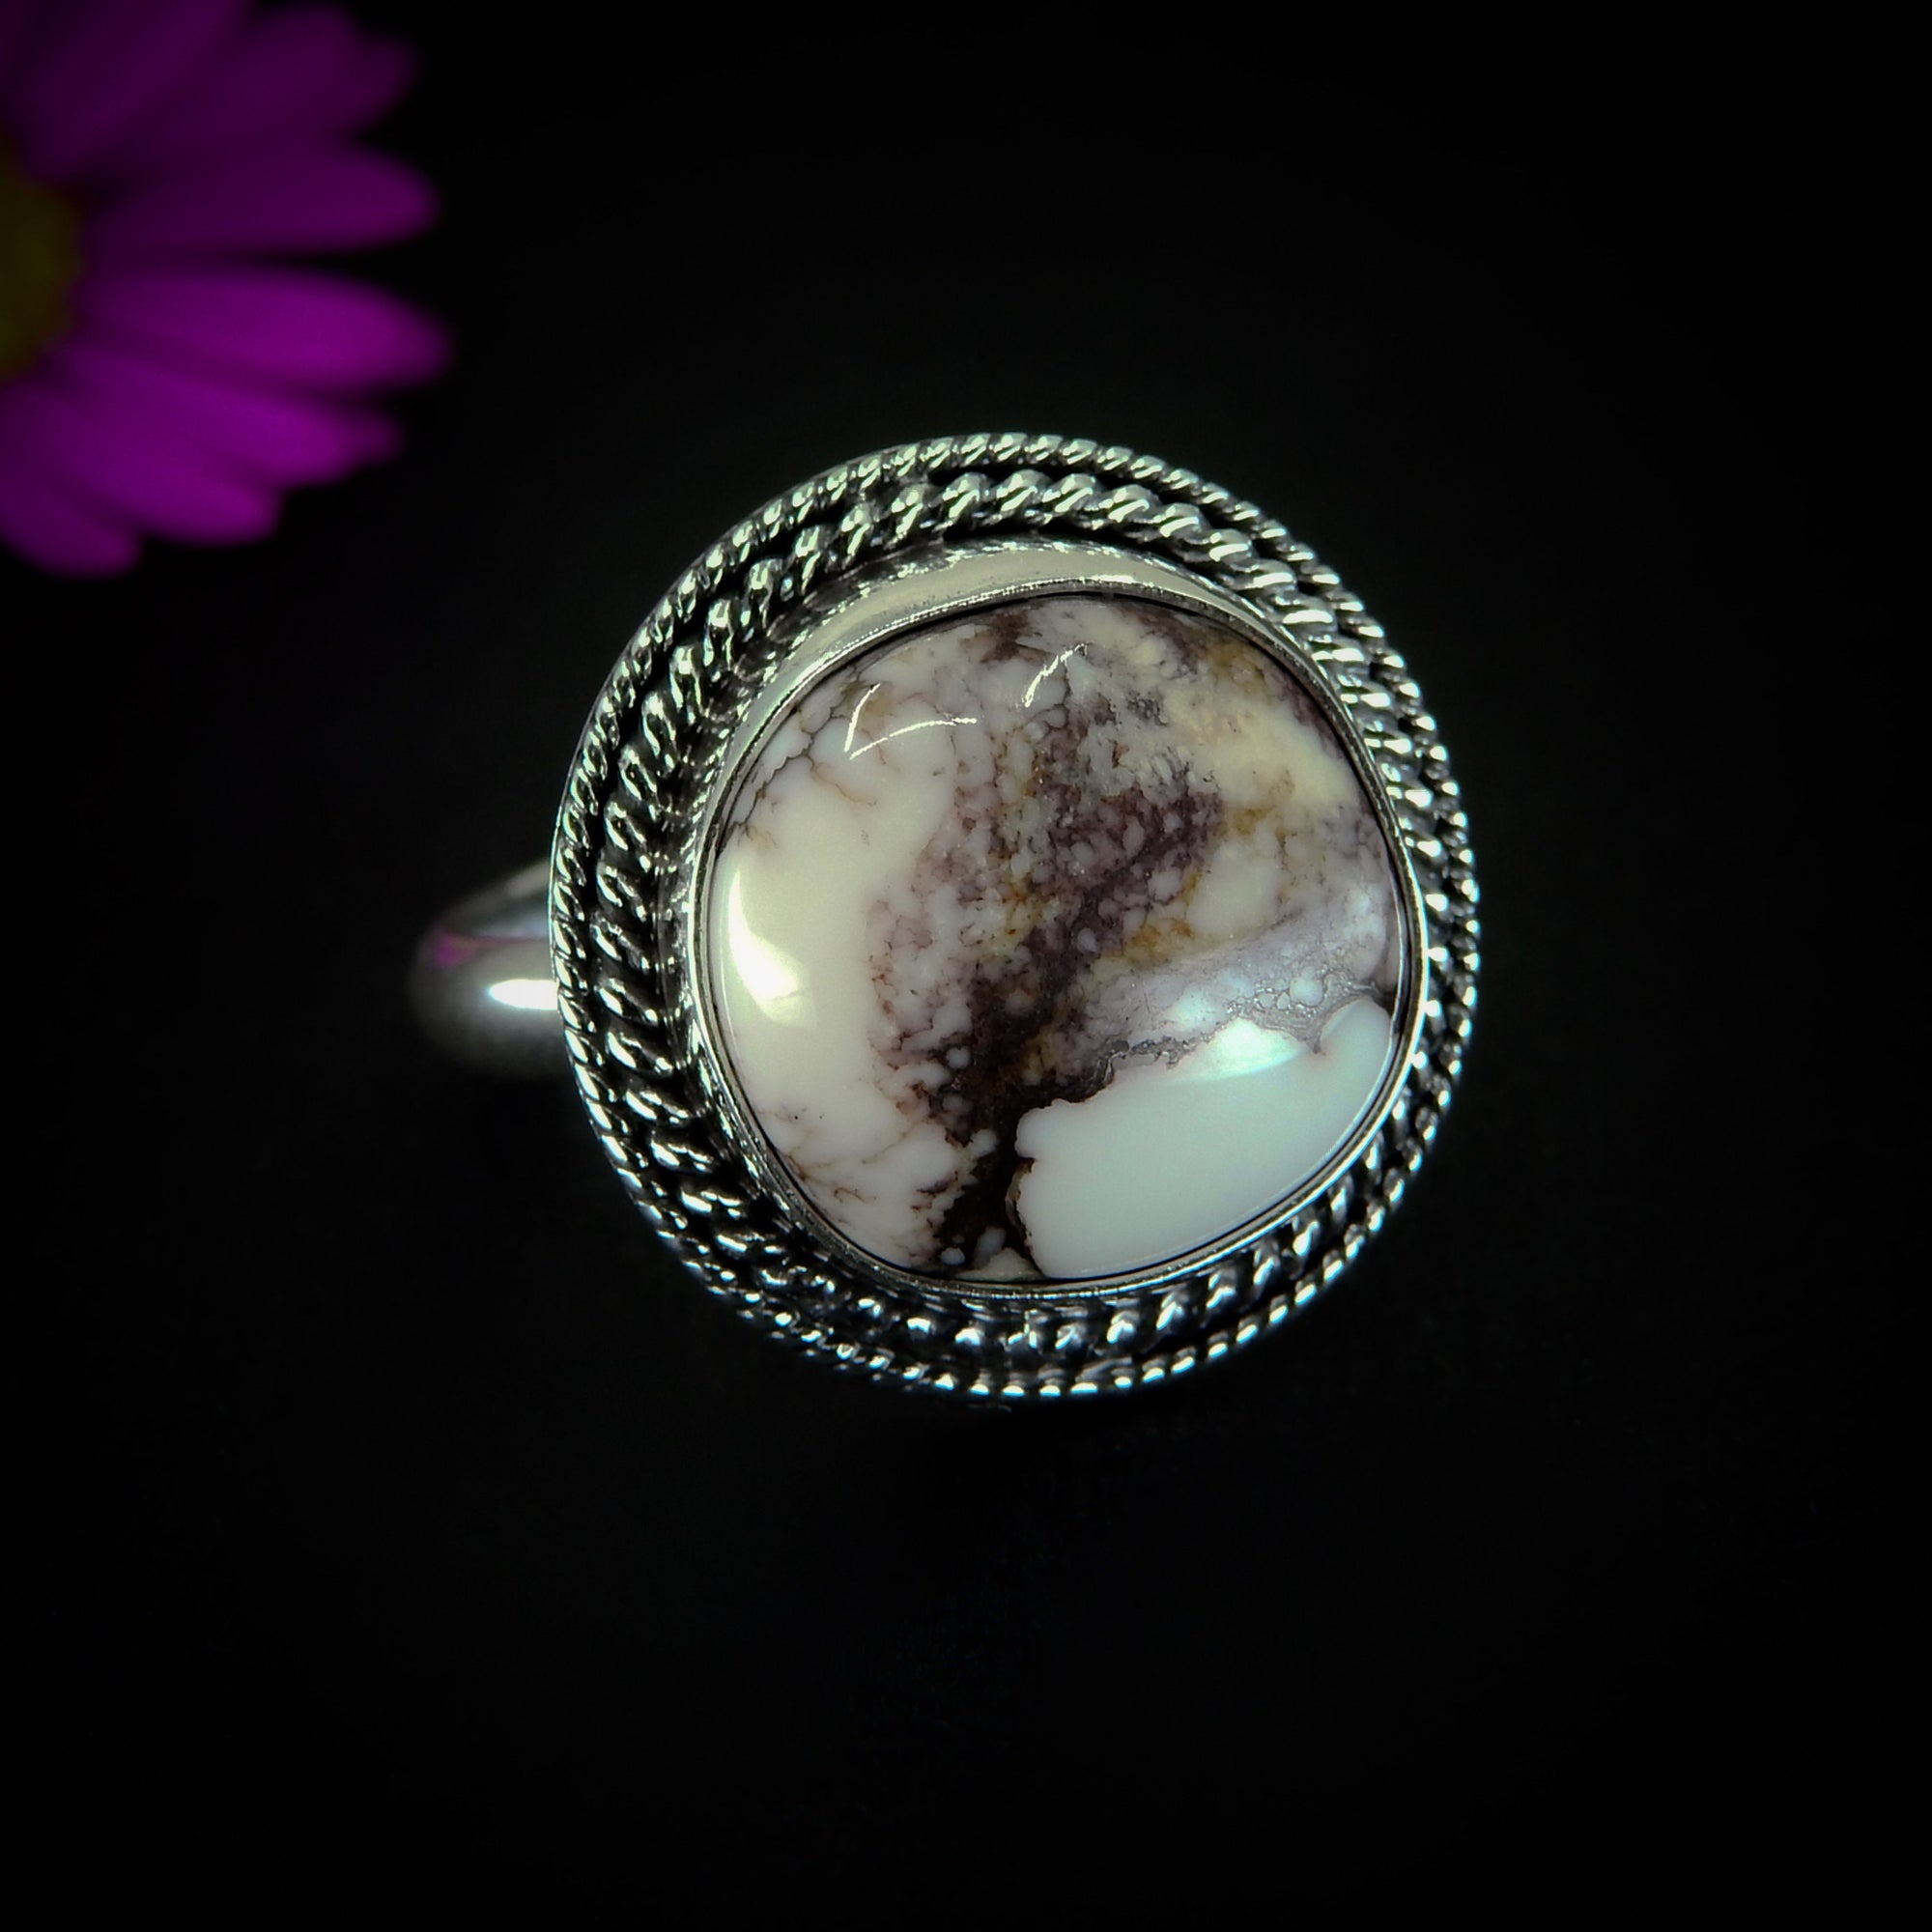 Wild Horse Magnesite Ring - Size 9 - Sterling Silver - Sacred Buffalo Ring - Artisan Jewellry - Handcrafted Statement Ring, White Turquoise